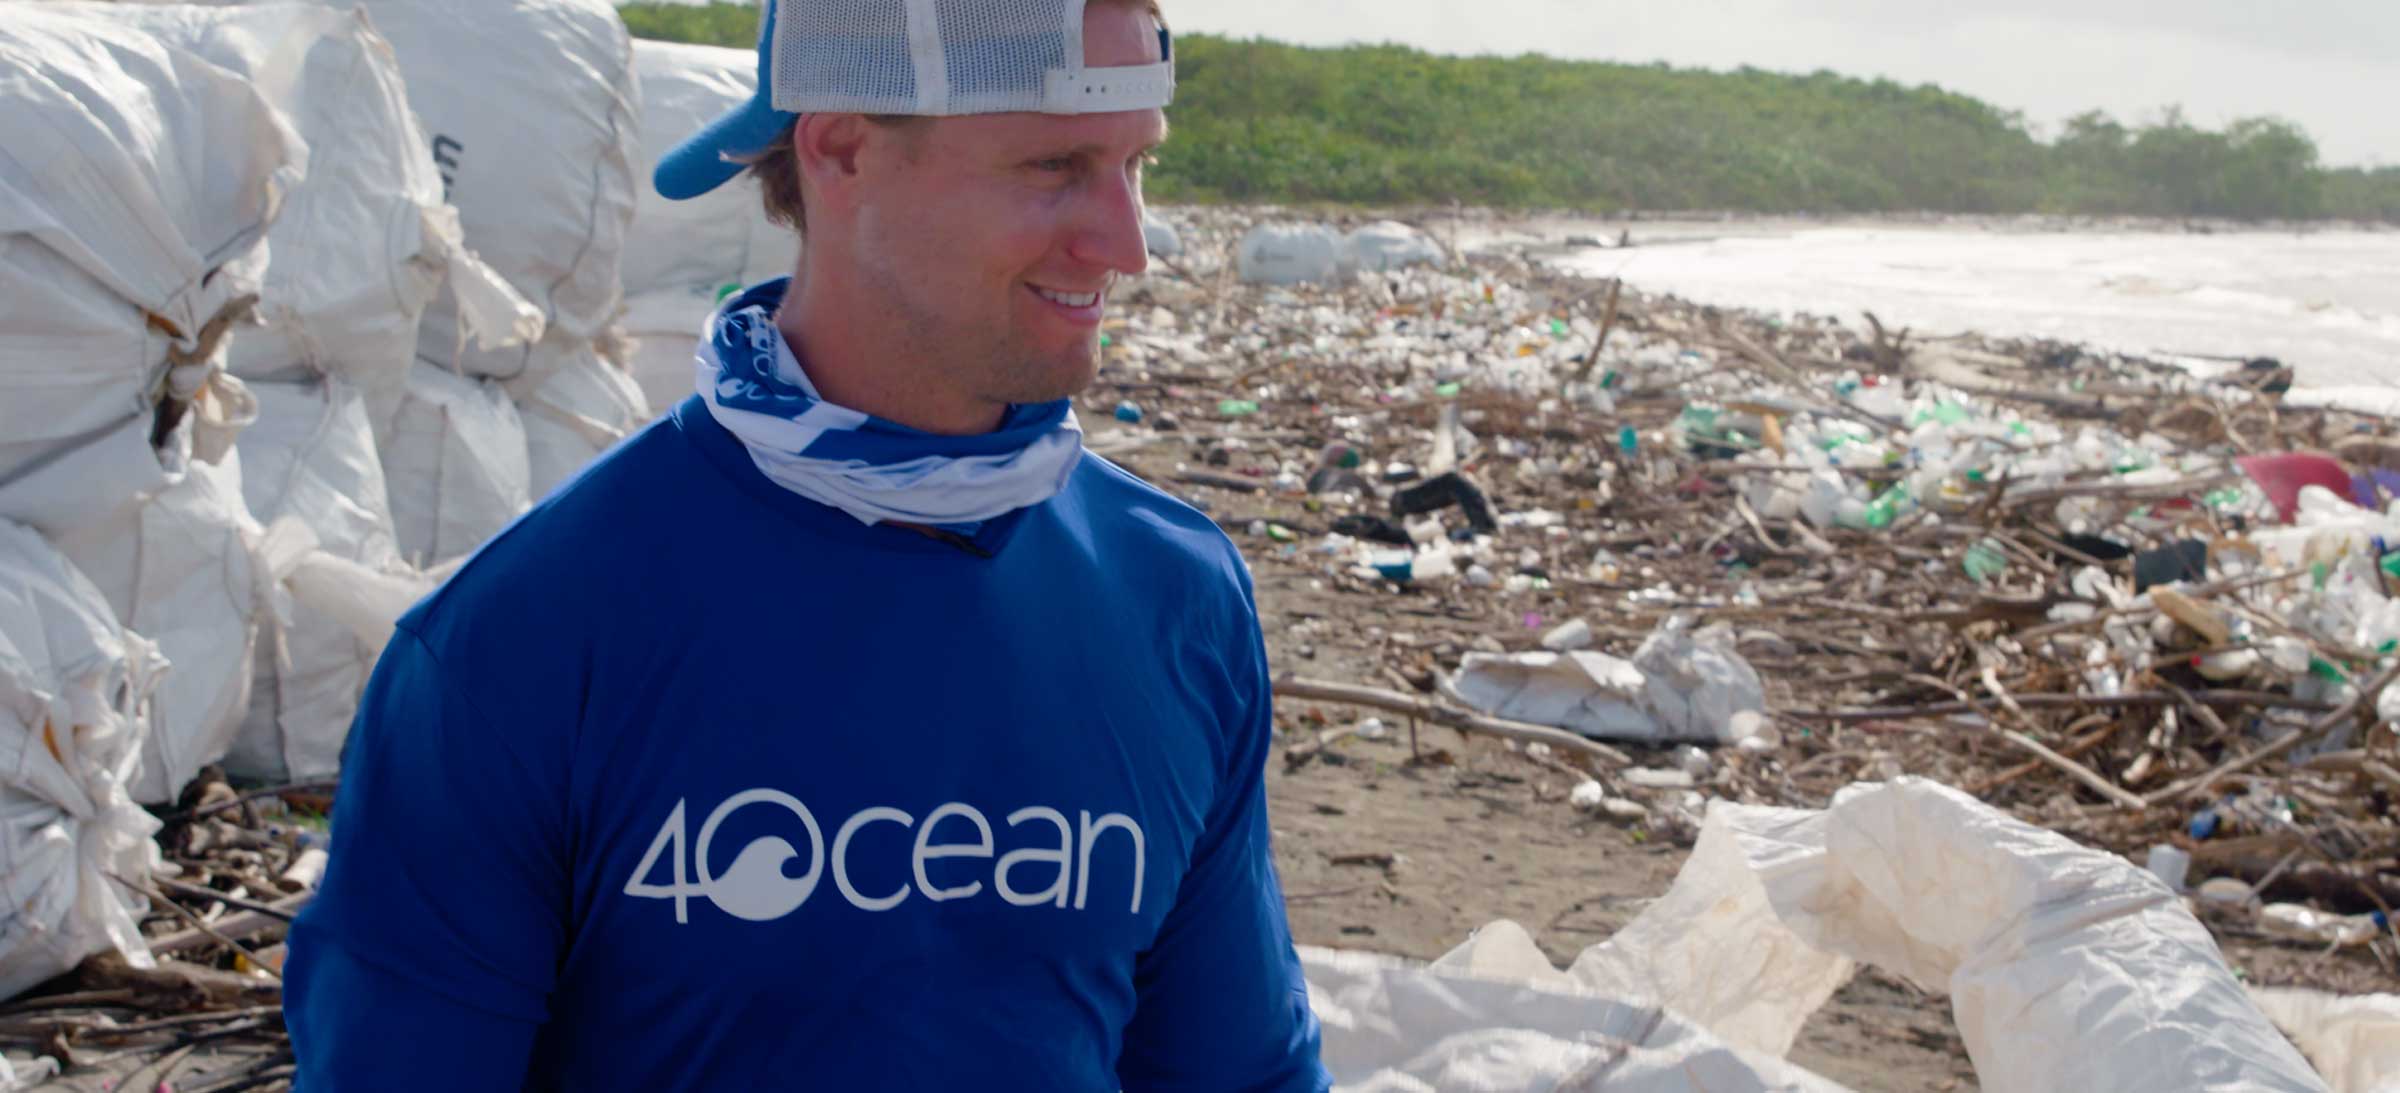 Ocean Cleanup Bracelets Help Raise Awareness About Plastic Pollution  Bead  the Change